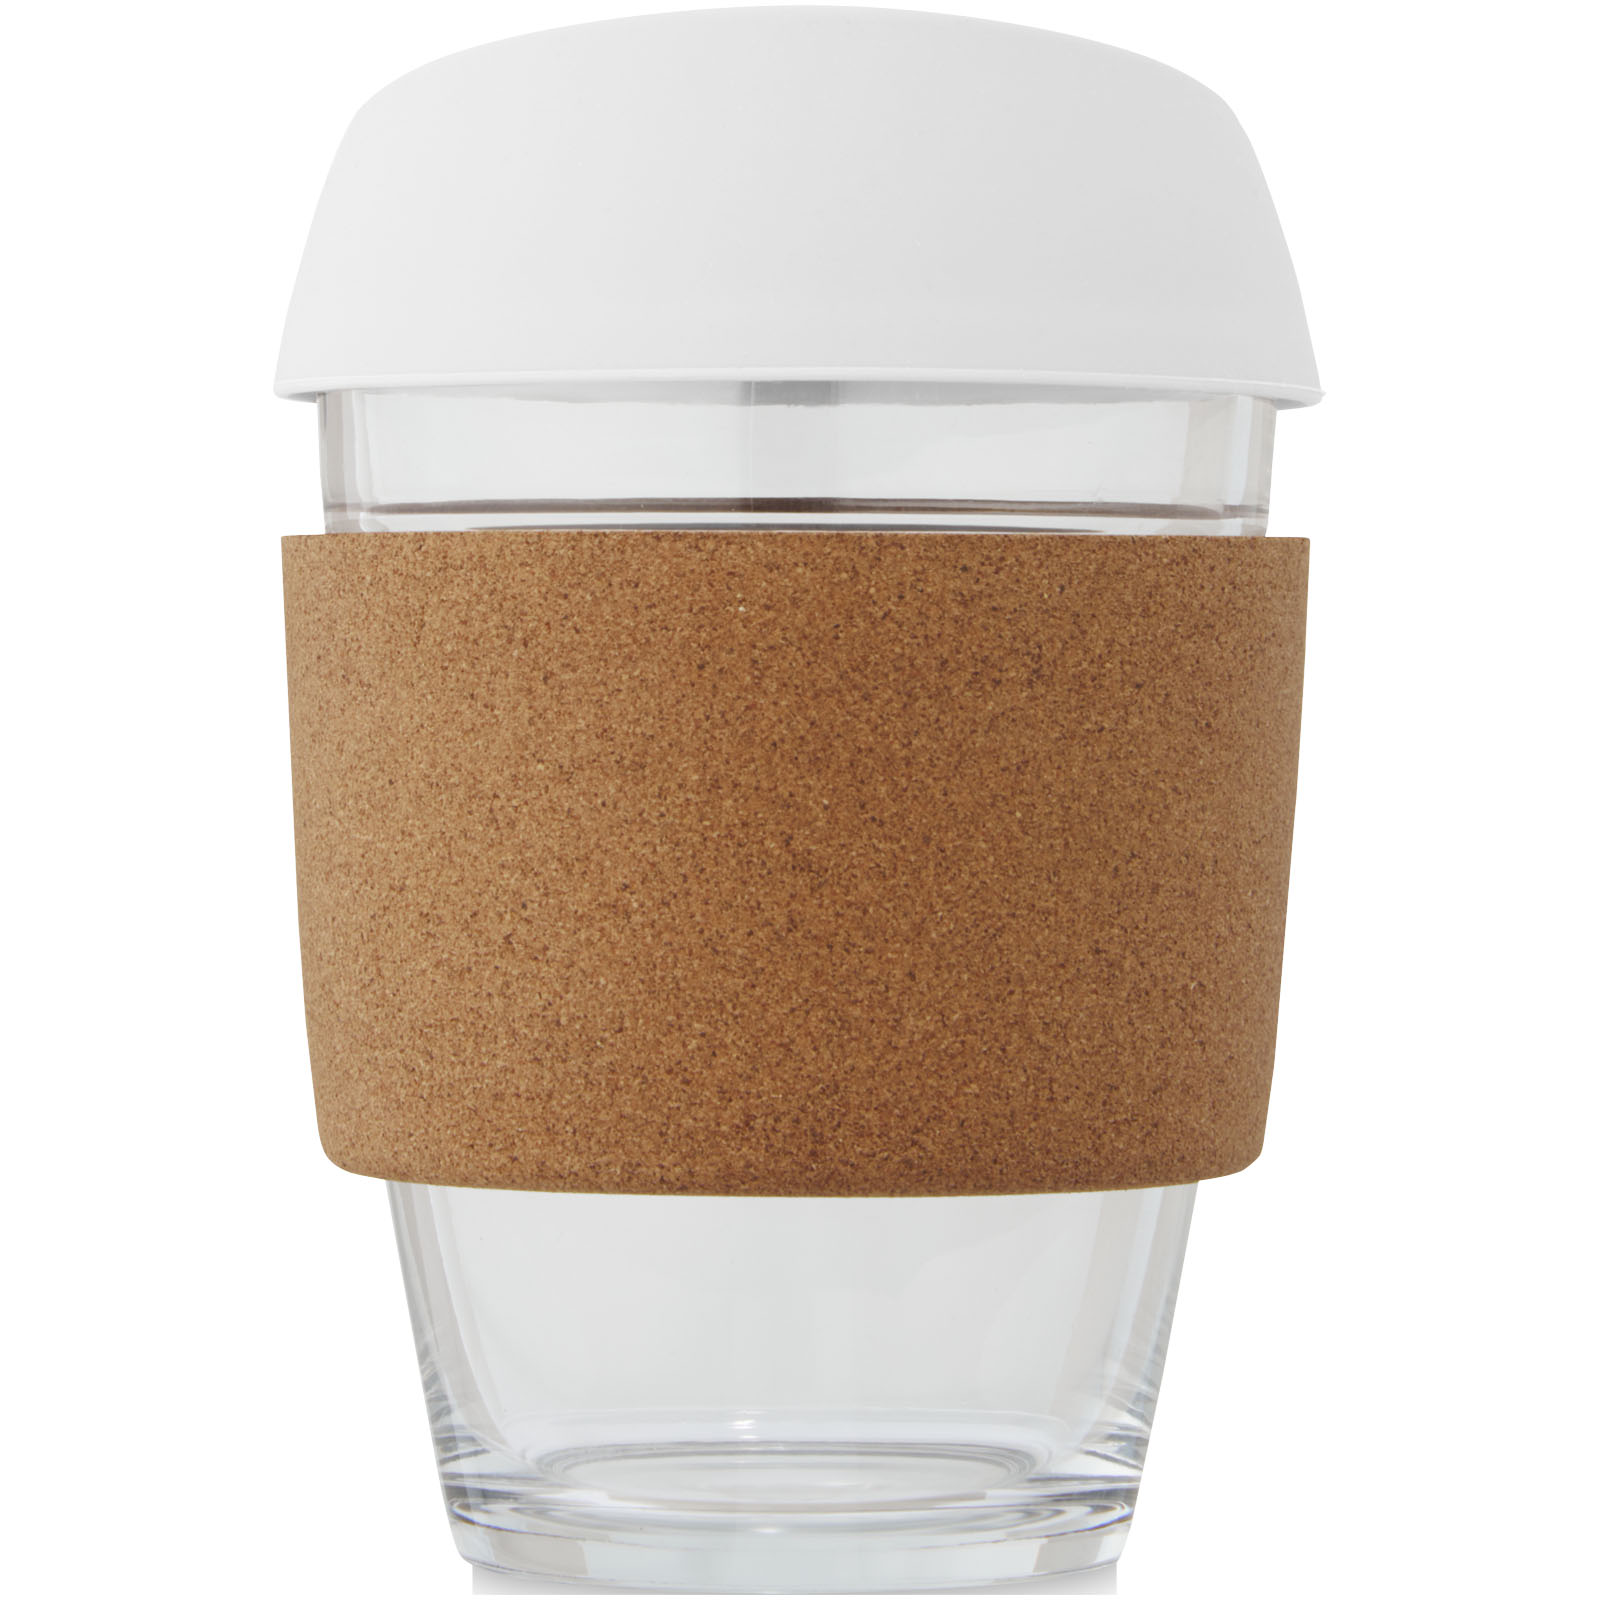 Advertising Travel mugs - Lidan 360 ml borosilicate glass tumbler with cork grip and silicone lid - 2